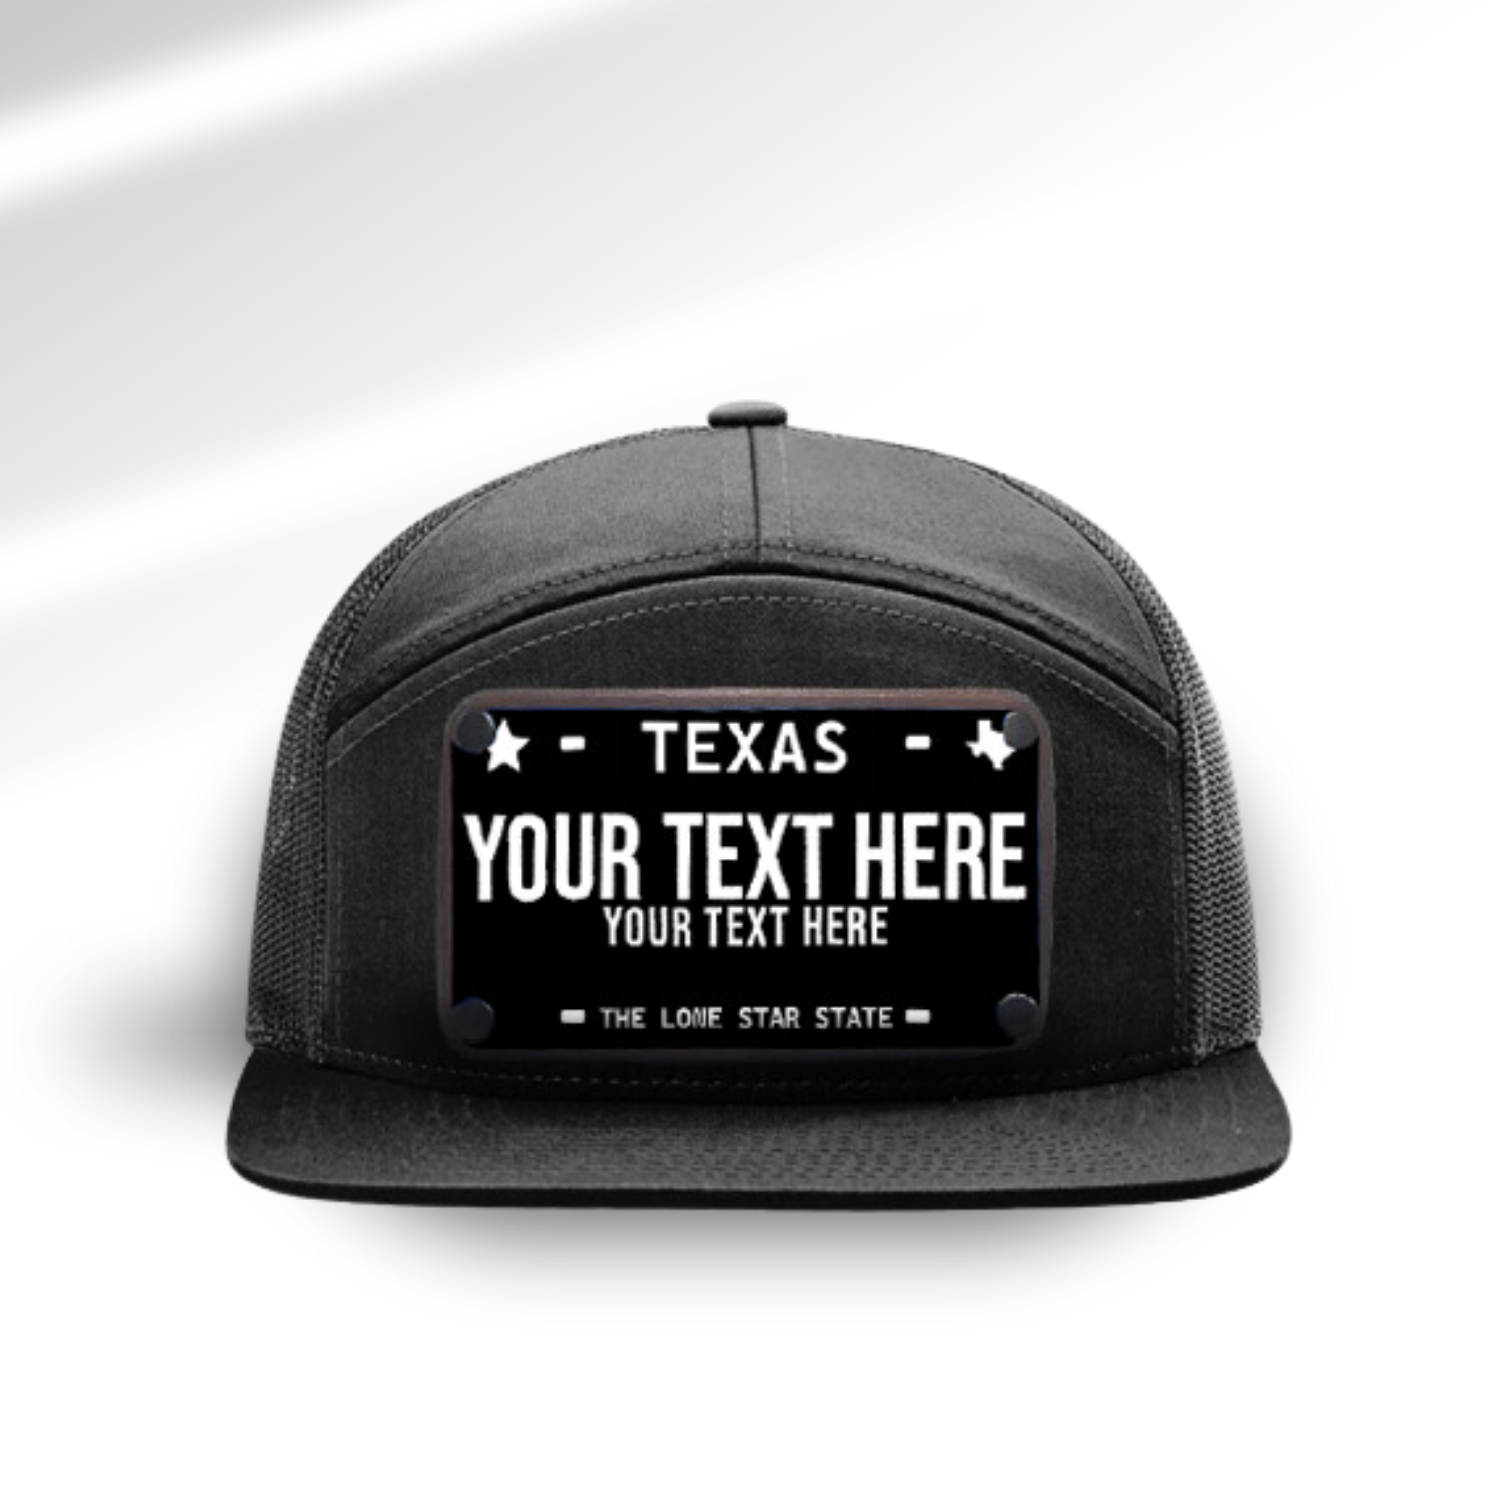 State License Plate Hats